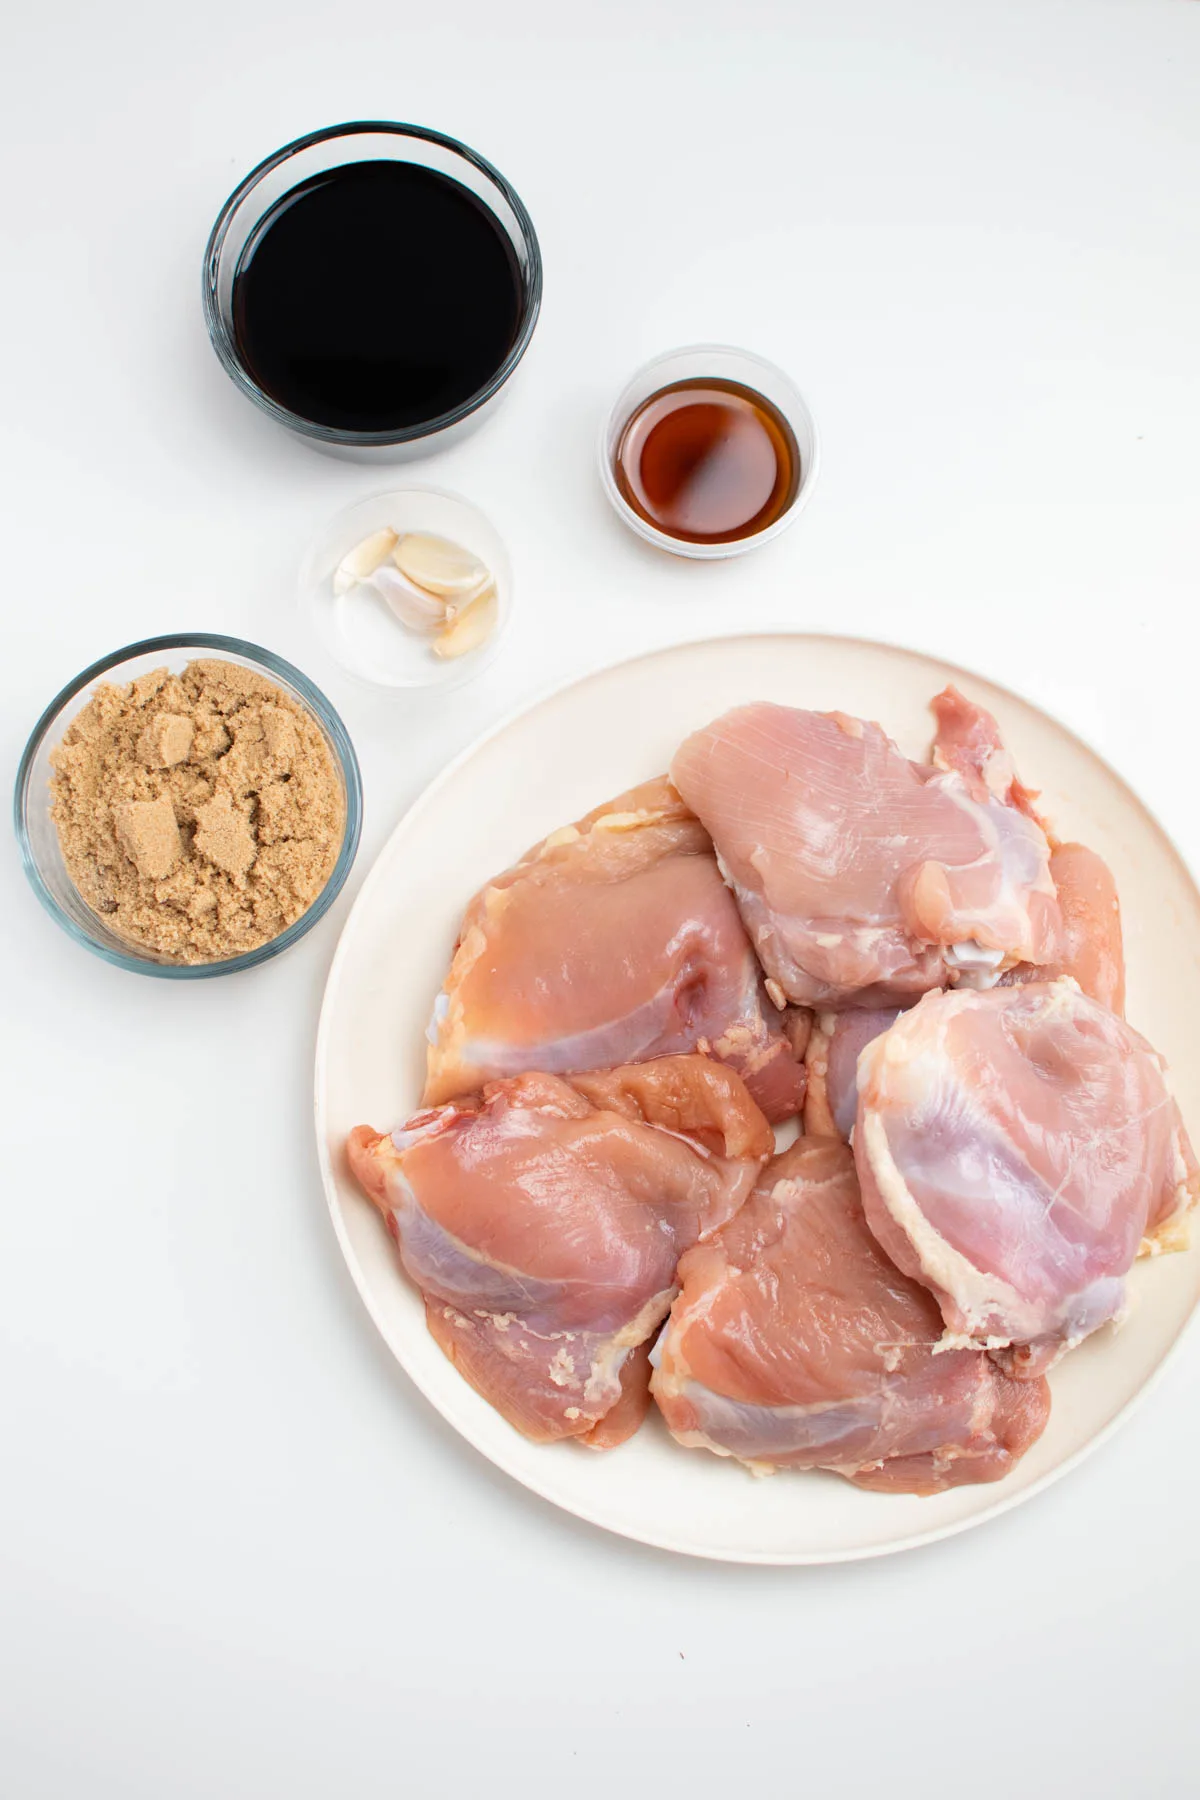 Asian chicken thigh ingredients on table including chicken thighs, brown sugar, and soy sauce.